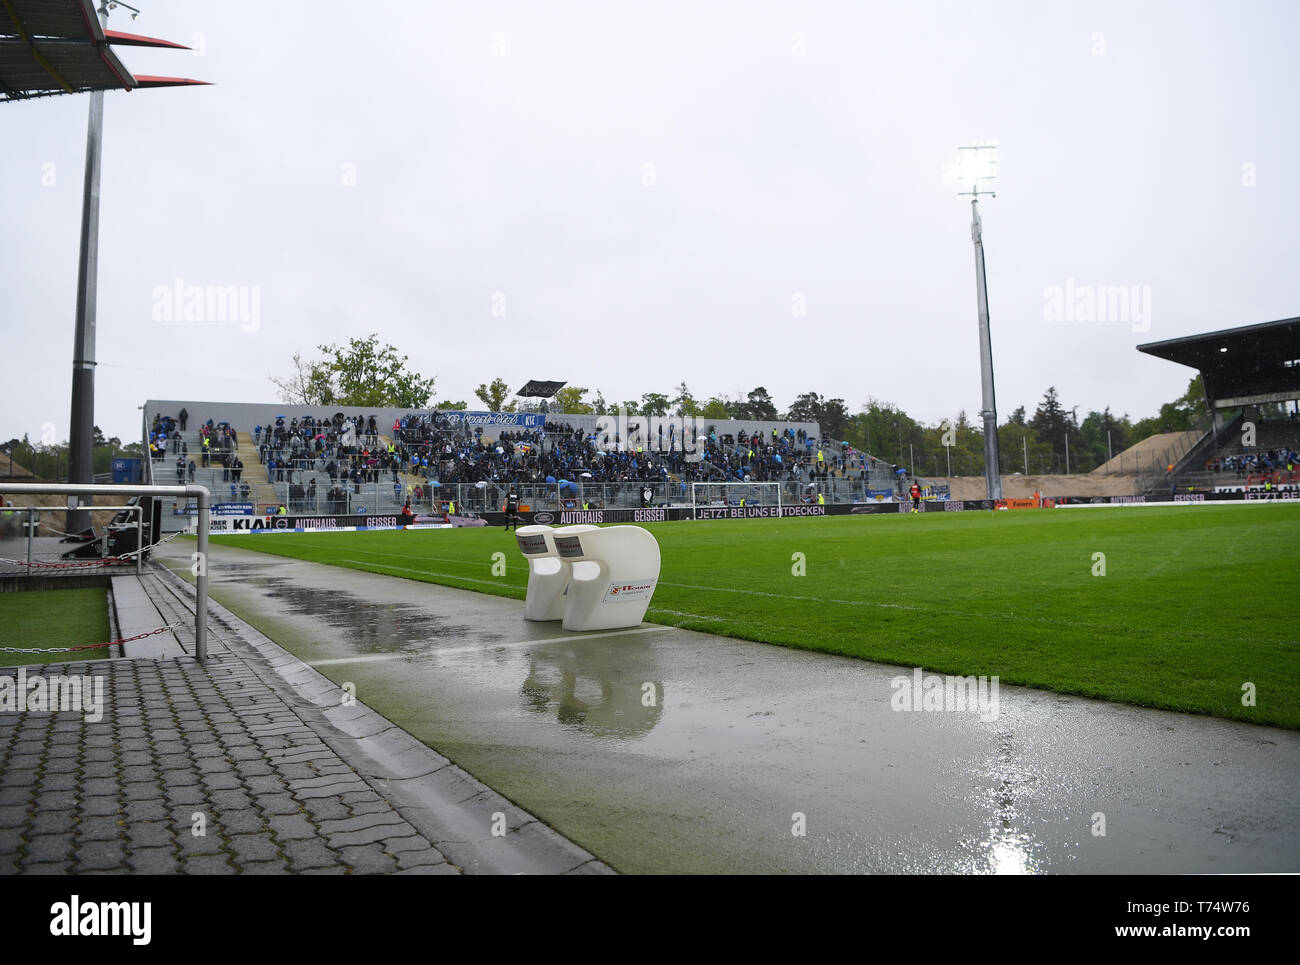 Karlsruhe, Deutschland. 04th May, 2019. Overview, overview, bad weather in the Wildparkstadion with provisional tribunes without a roof. GES/Soccer/3rd league: Karlsruher SC - SG Sonnenhof Grossaspach, May 4, 1919 - Football/Soccer 3rd Division: Karlsruher SC vs SG Sonnenhof Grossaspach, Karlsruhe, May 04, 2019 - | usage worldwide Credit: dpa/Alamy Live News Stock Photo